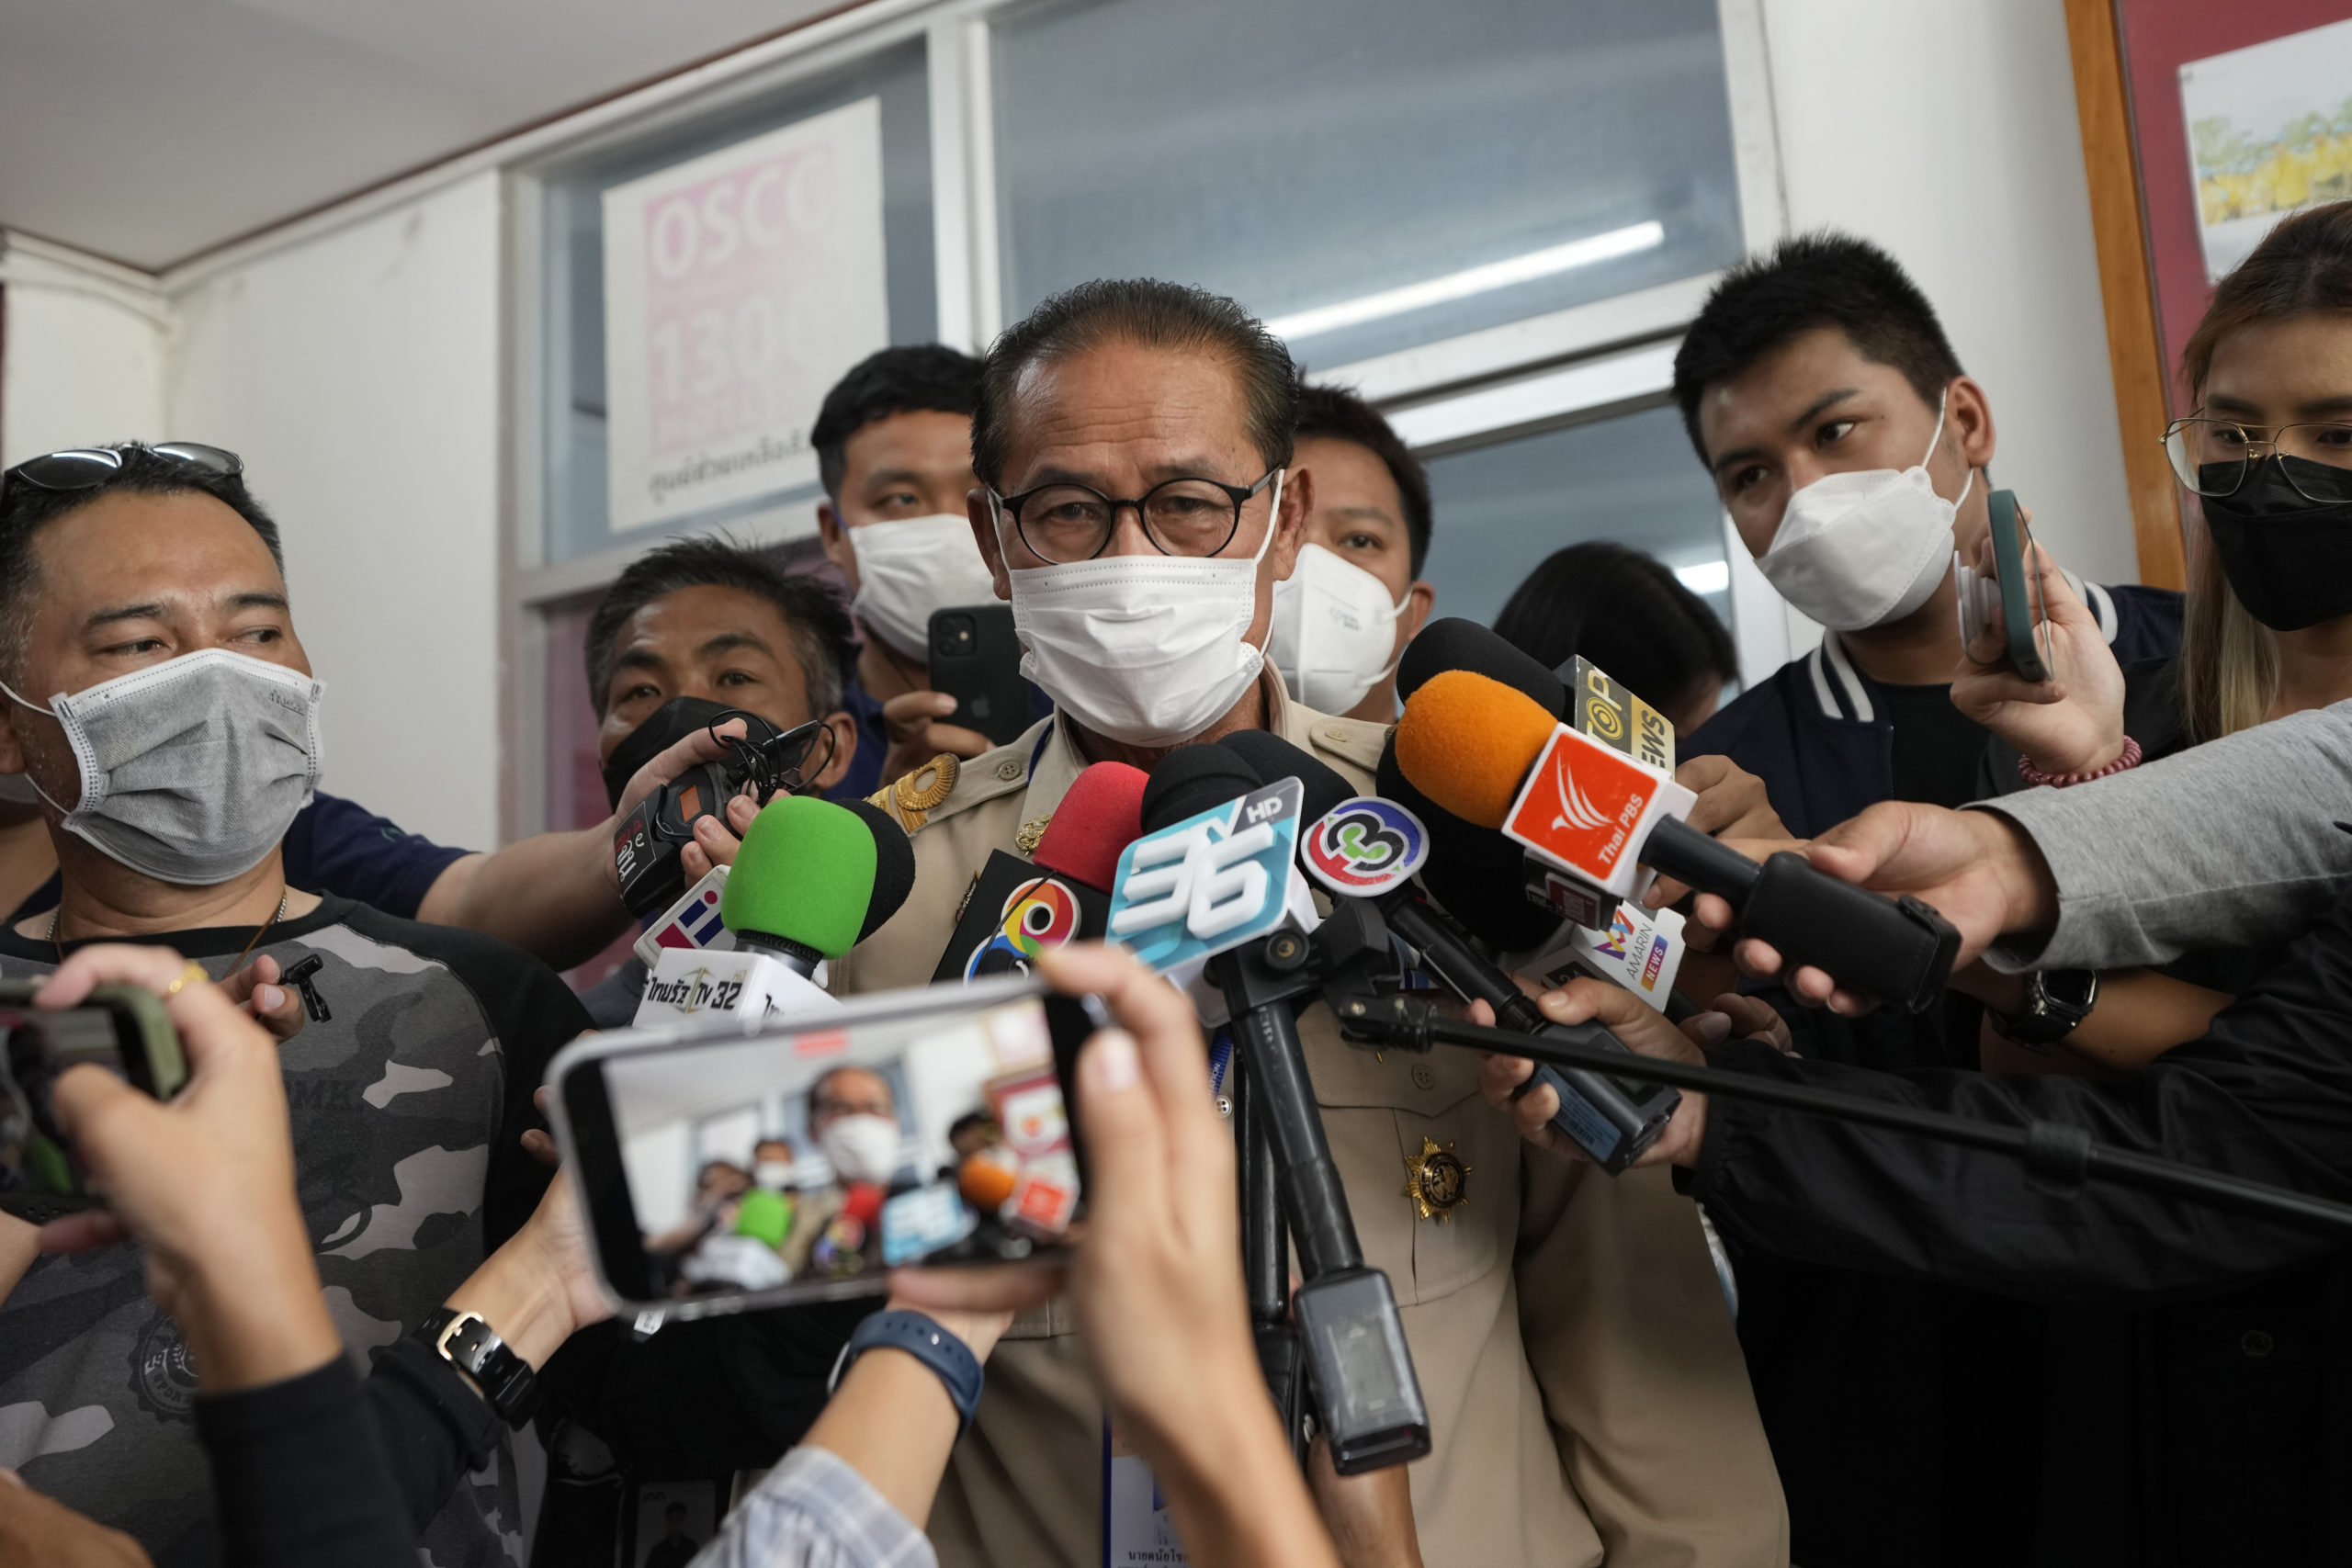 Chief executive of Uthai Sawan Sub-district Administrative Organization Danaichok Boonsom talks to reporters at a police station in Uthai Sawan, north eastern Thailand, on Sunday.